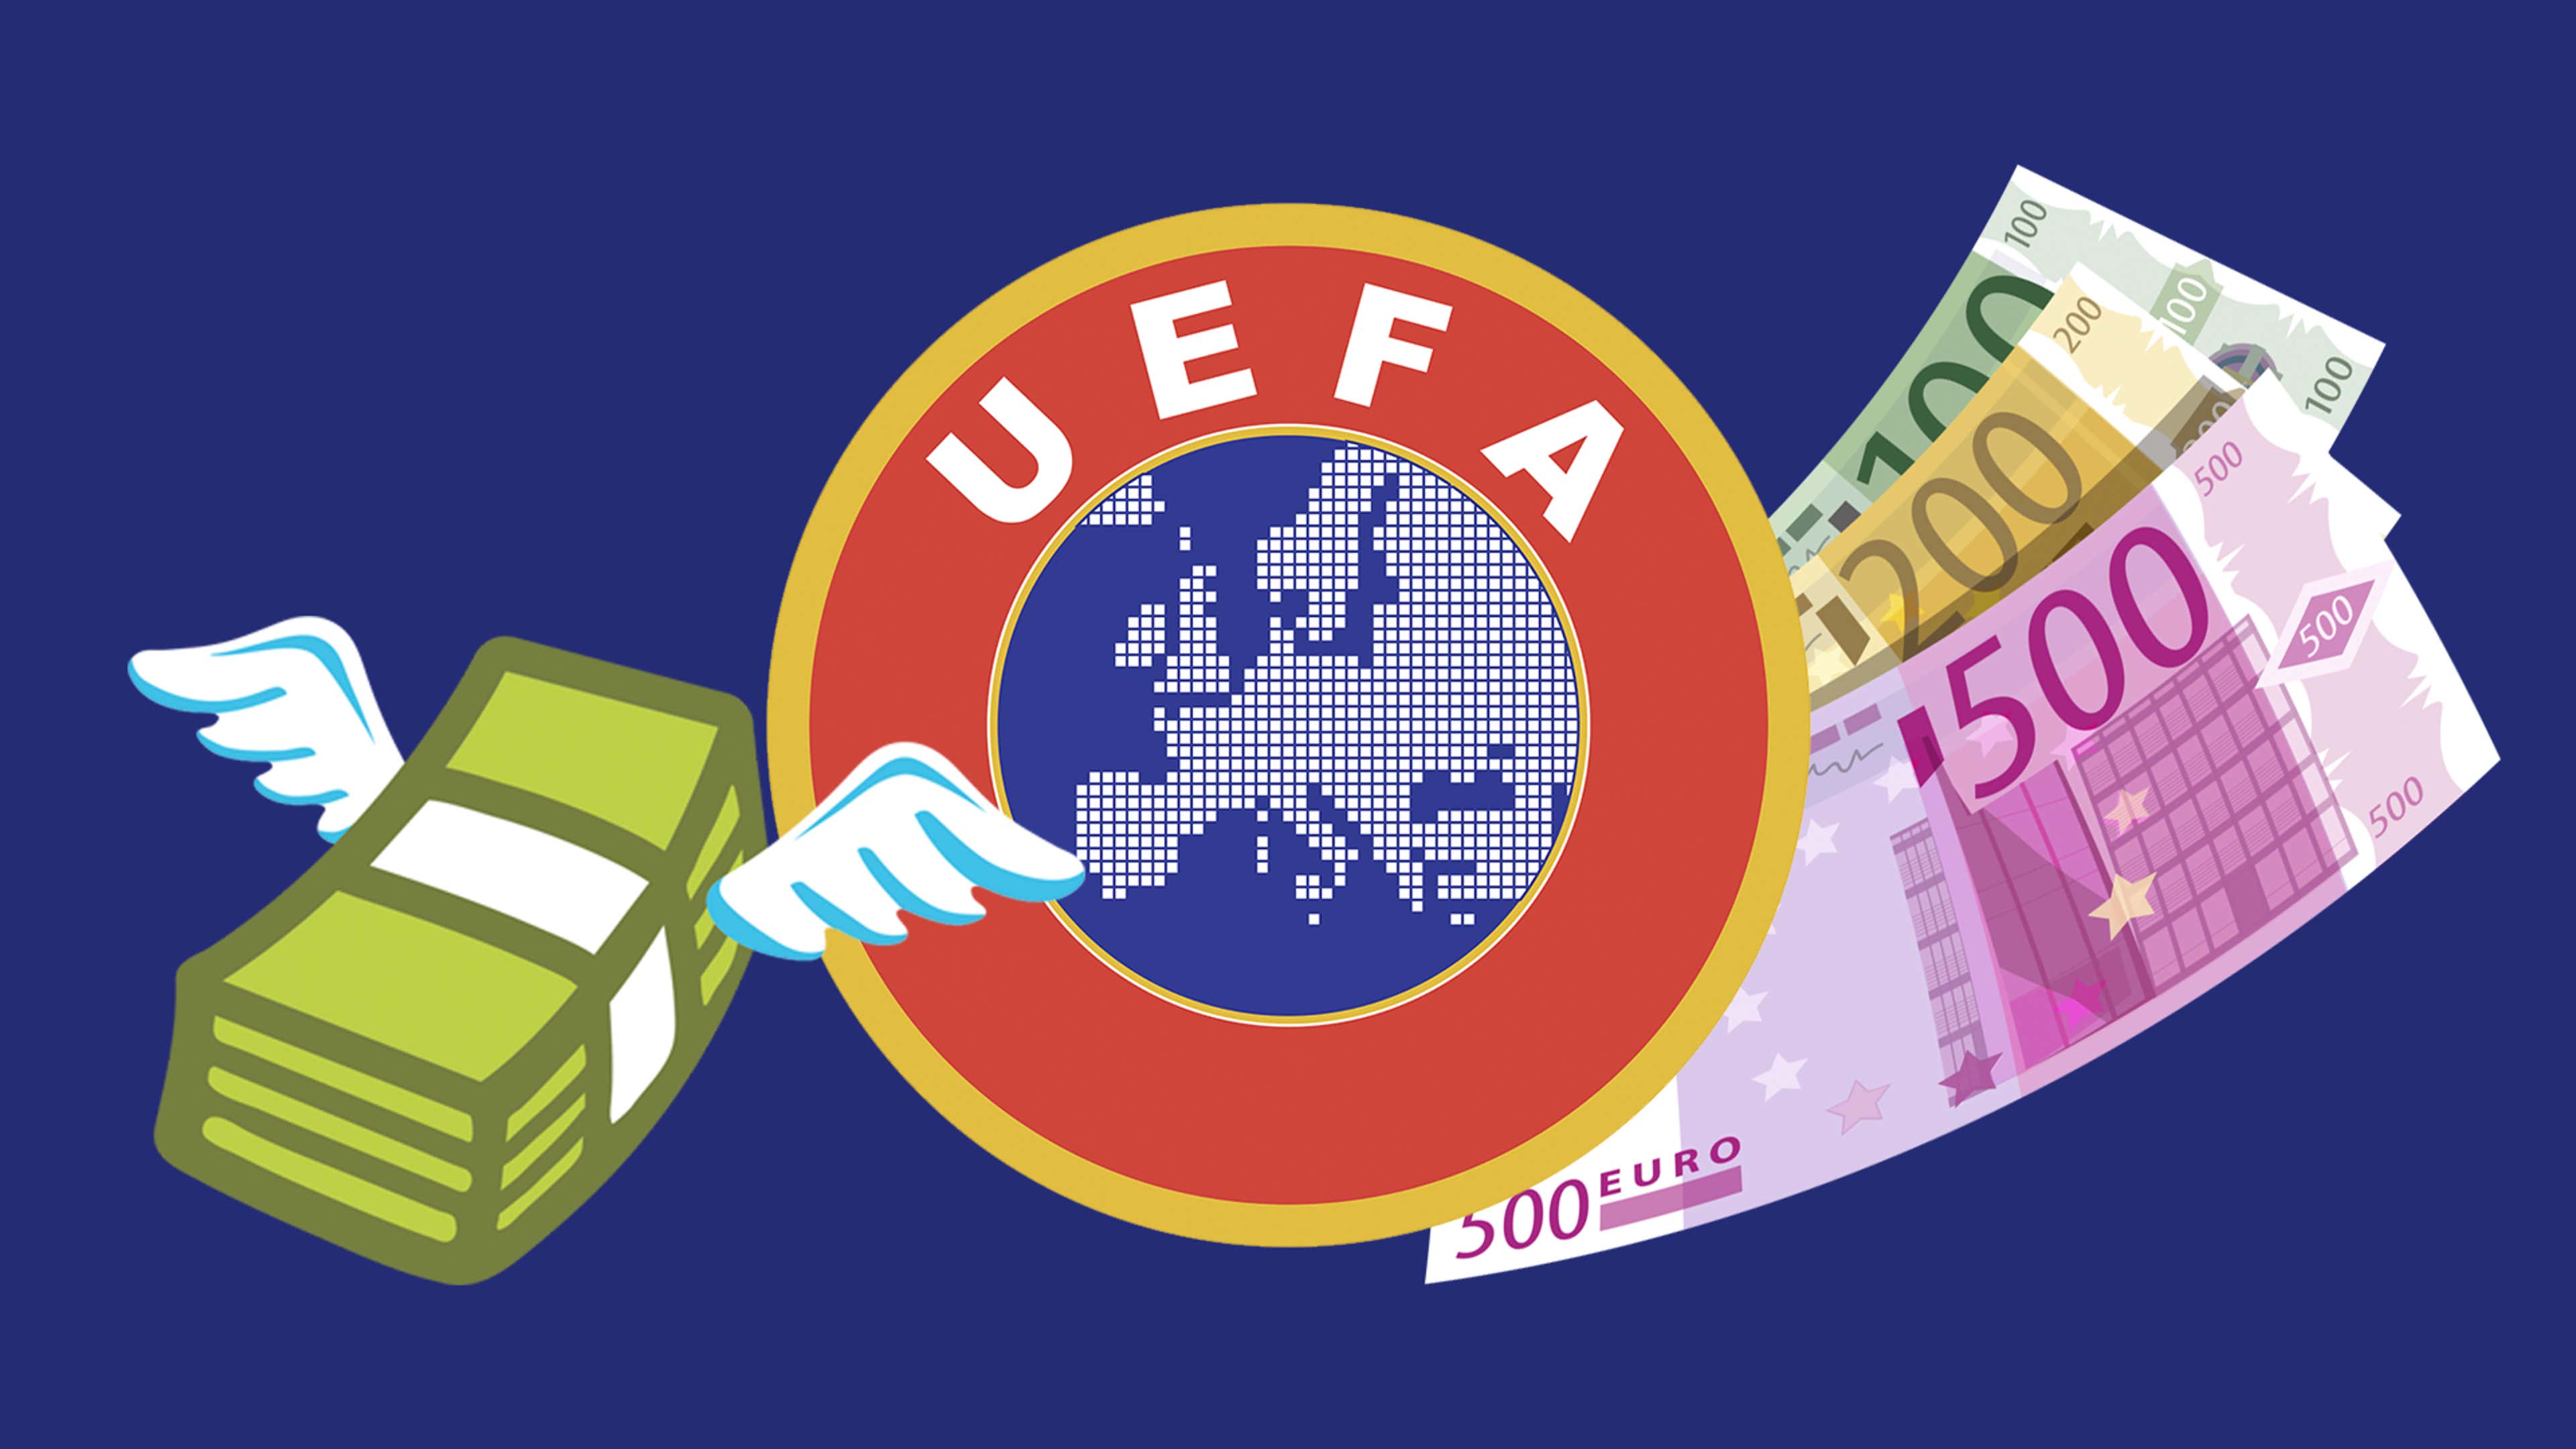  An illustration of the UEFA logo with money flying around it representing the Premier League's financial regulations.